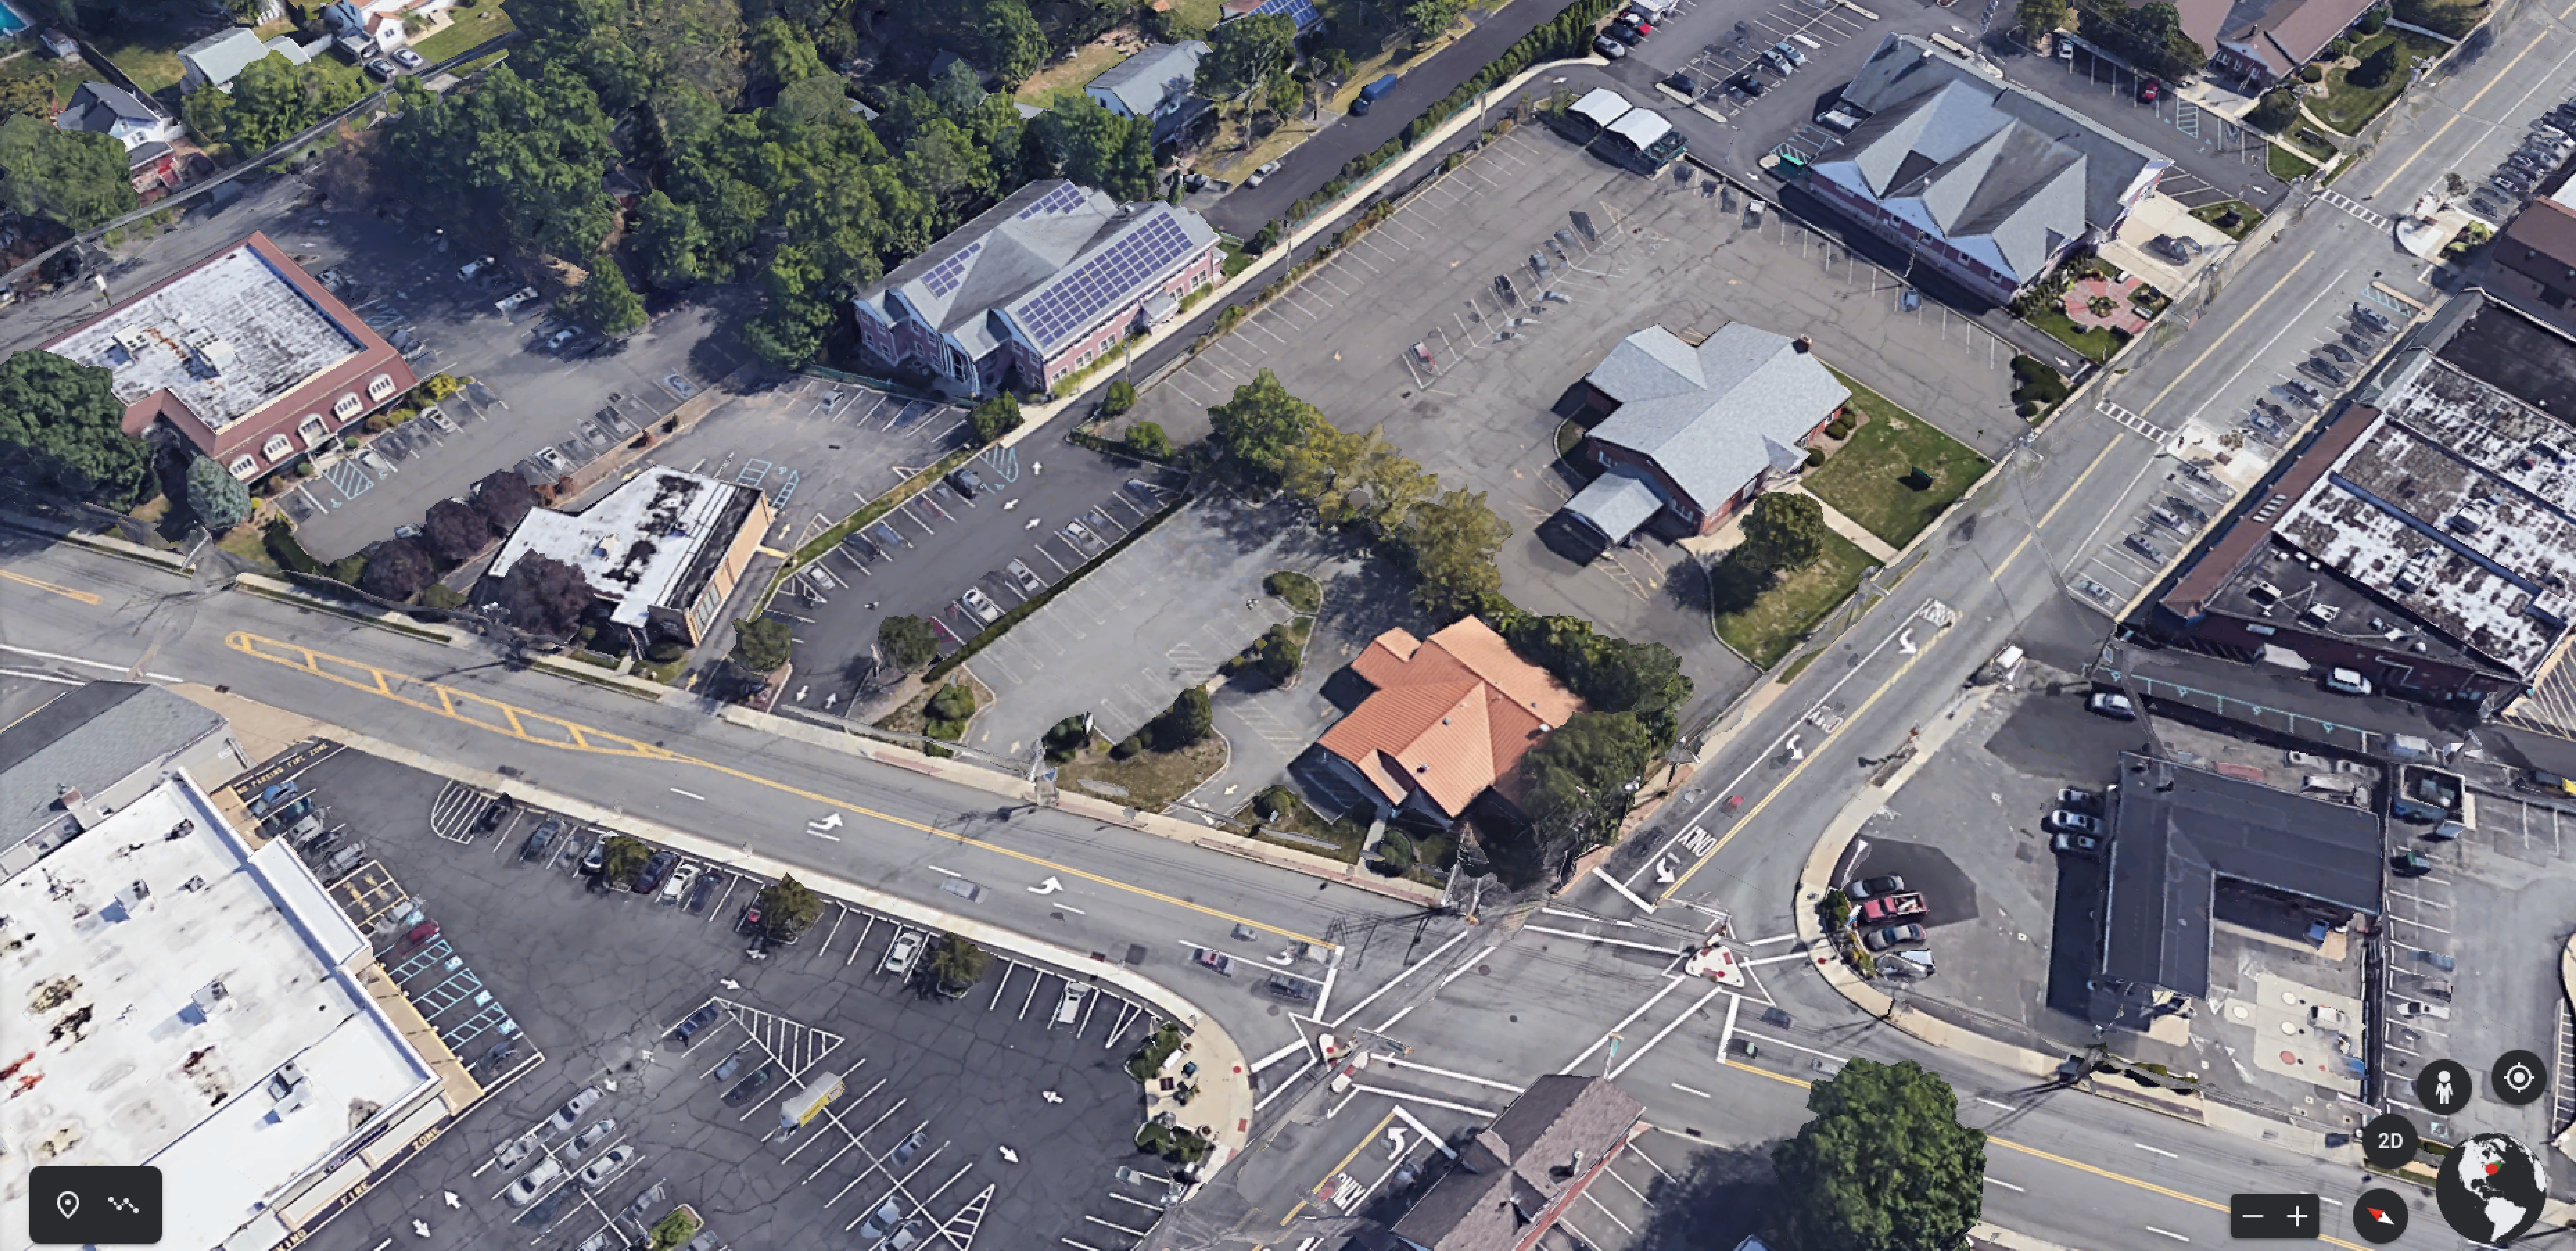 NAI James E. Hanson Helps Bring New Chase Branch to Waldwick, N.J. in $2.2M Sale of Retail Property